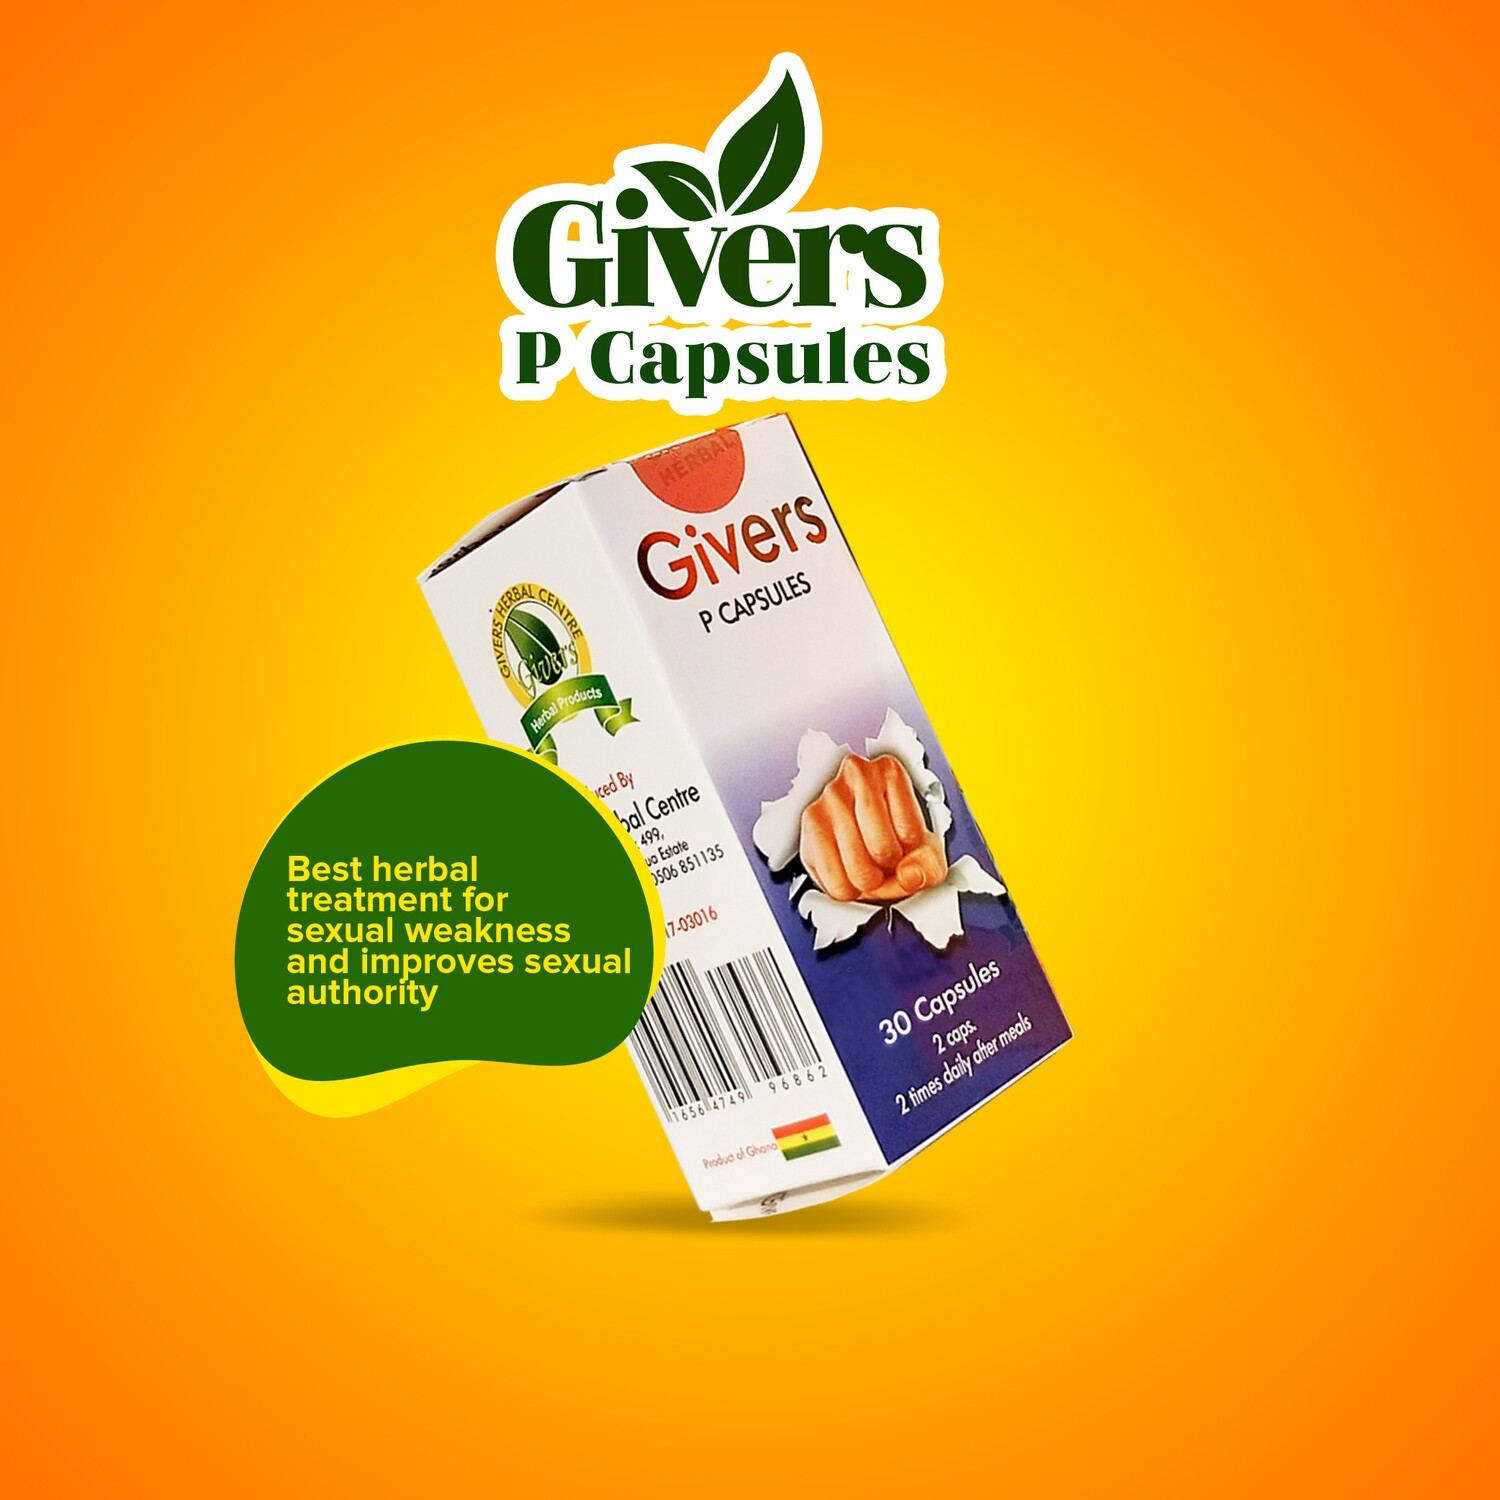 Givers P Capsules